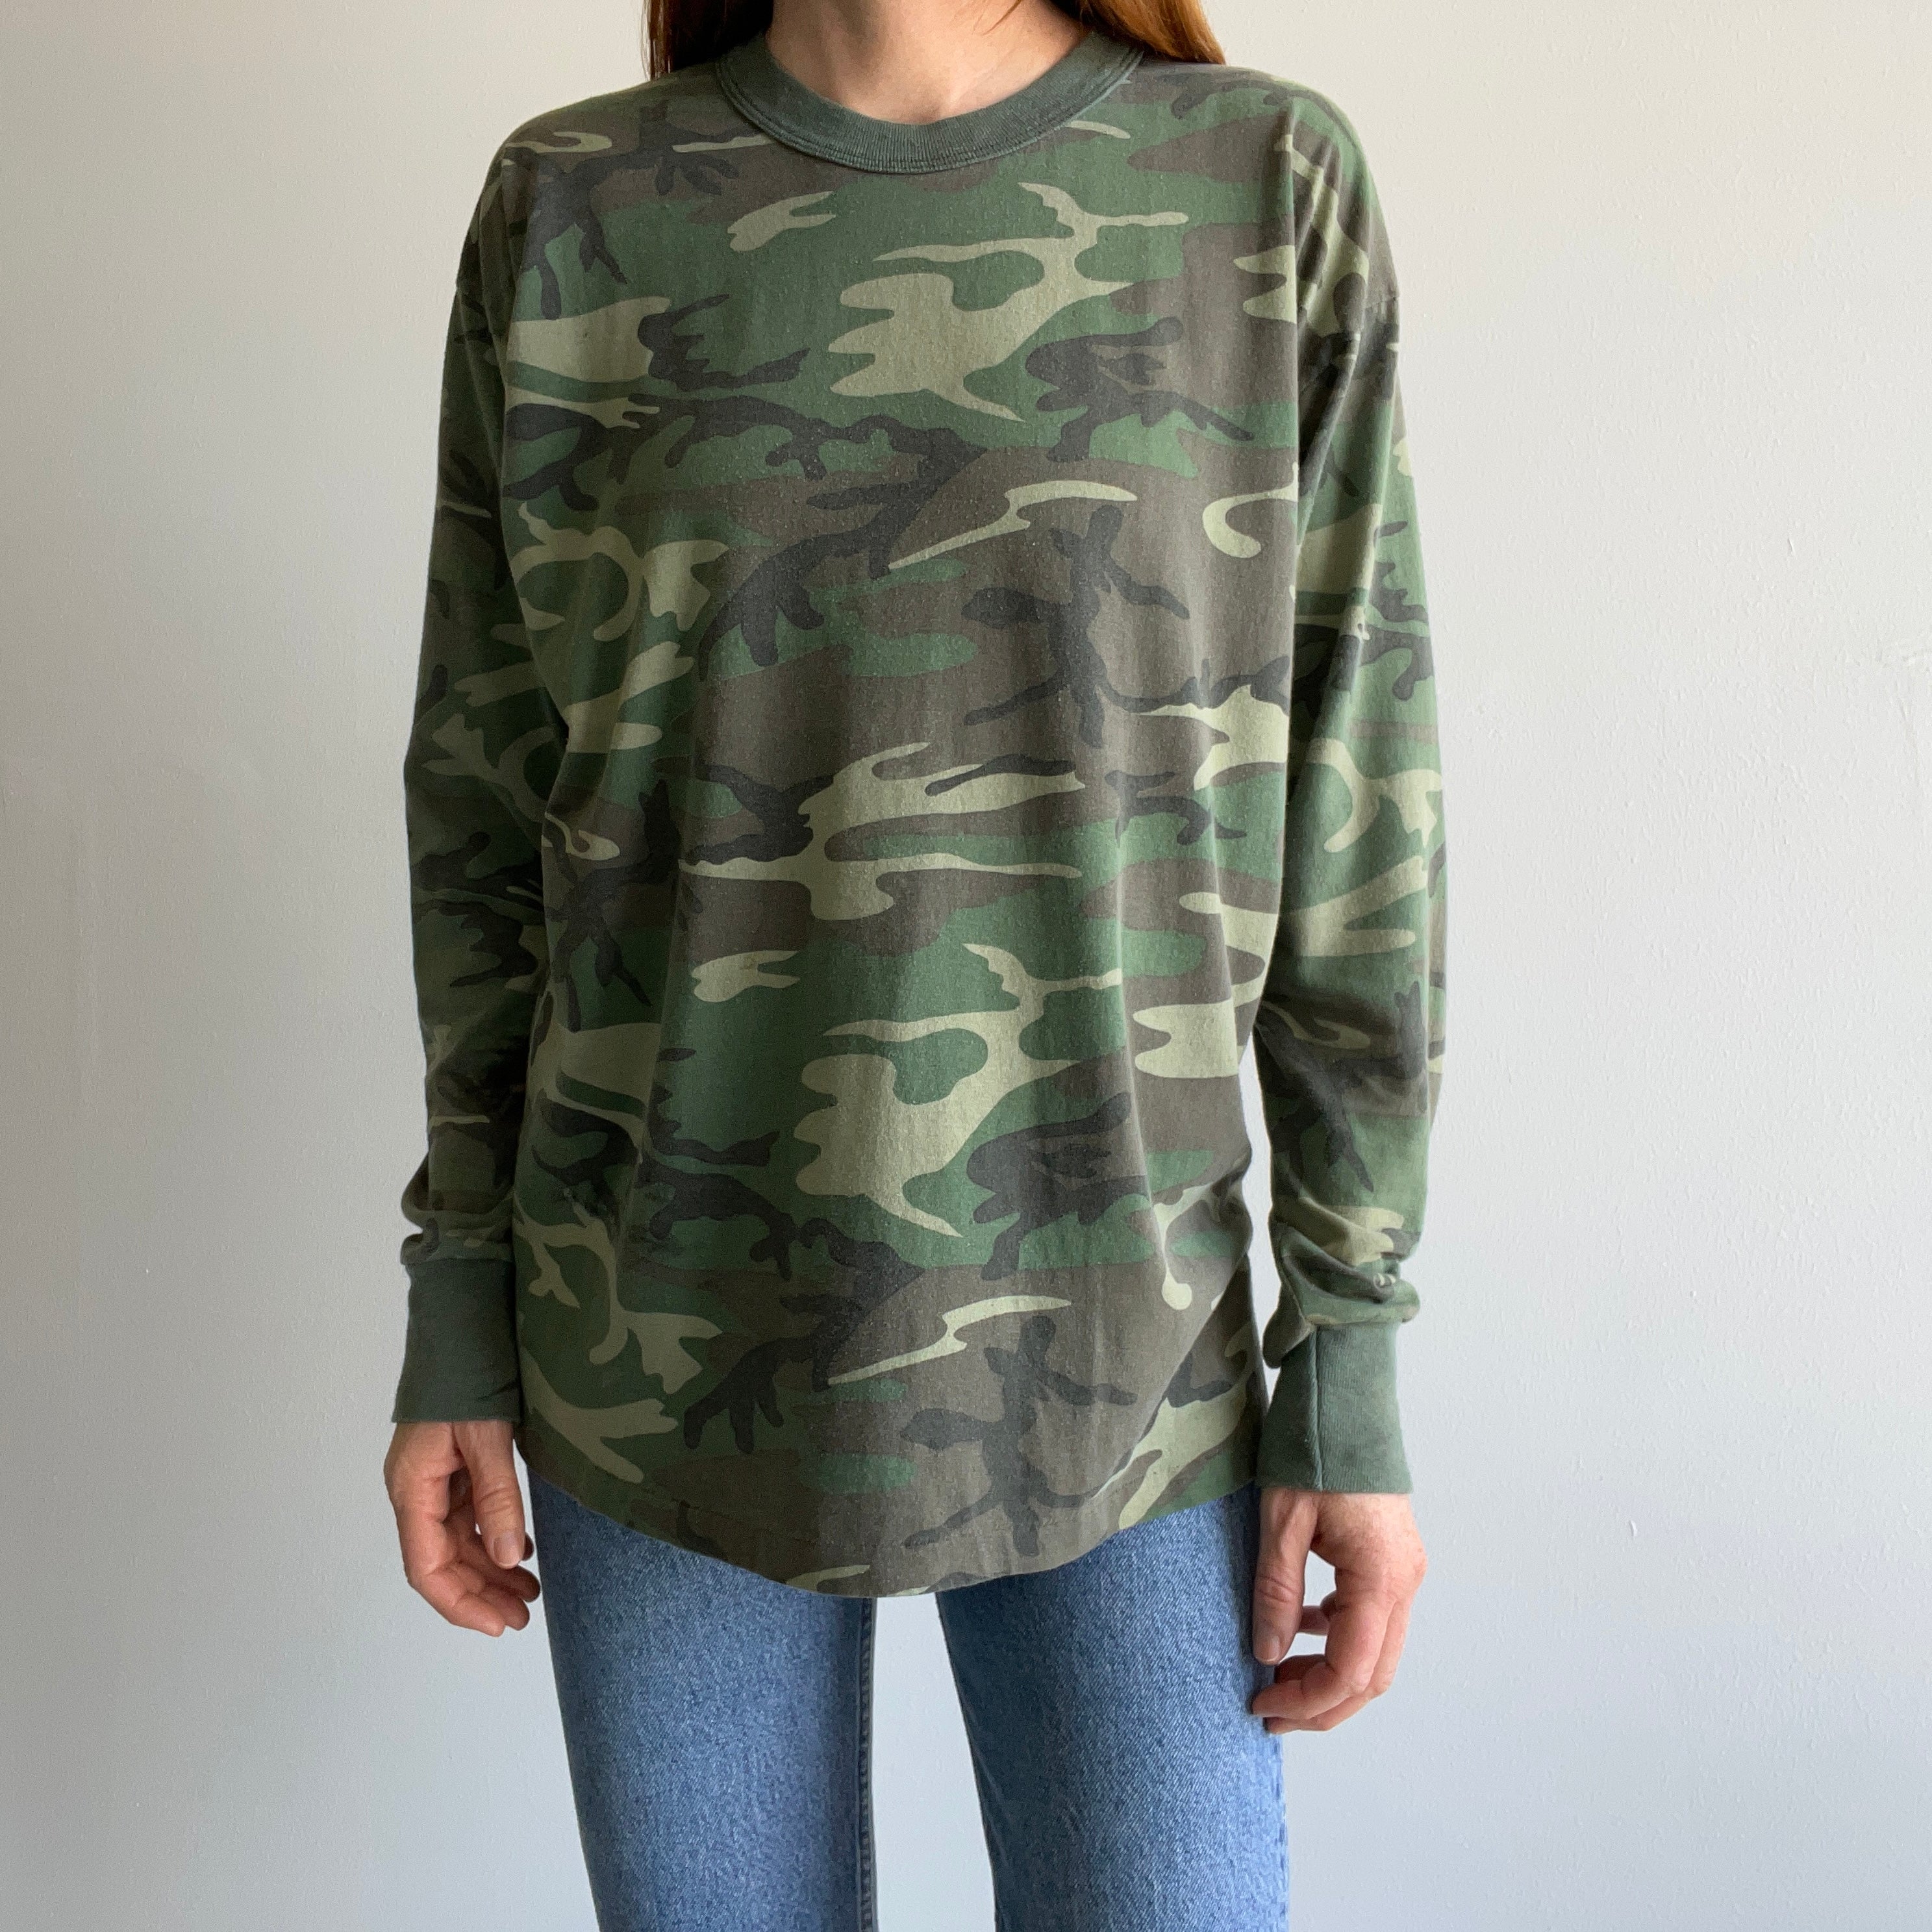 1980s Rothco Camo Long Sleeve Shirt with Staining and Wear